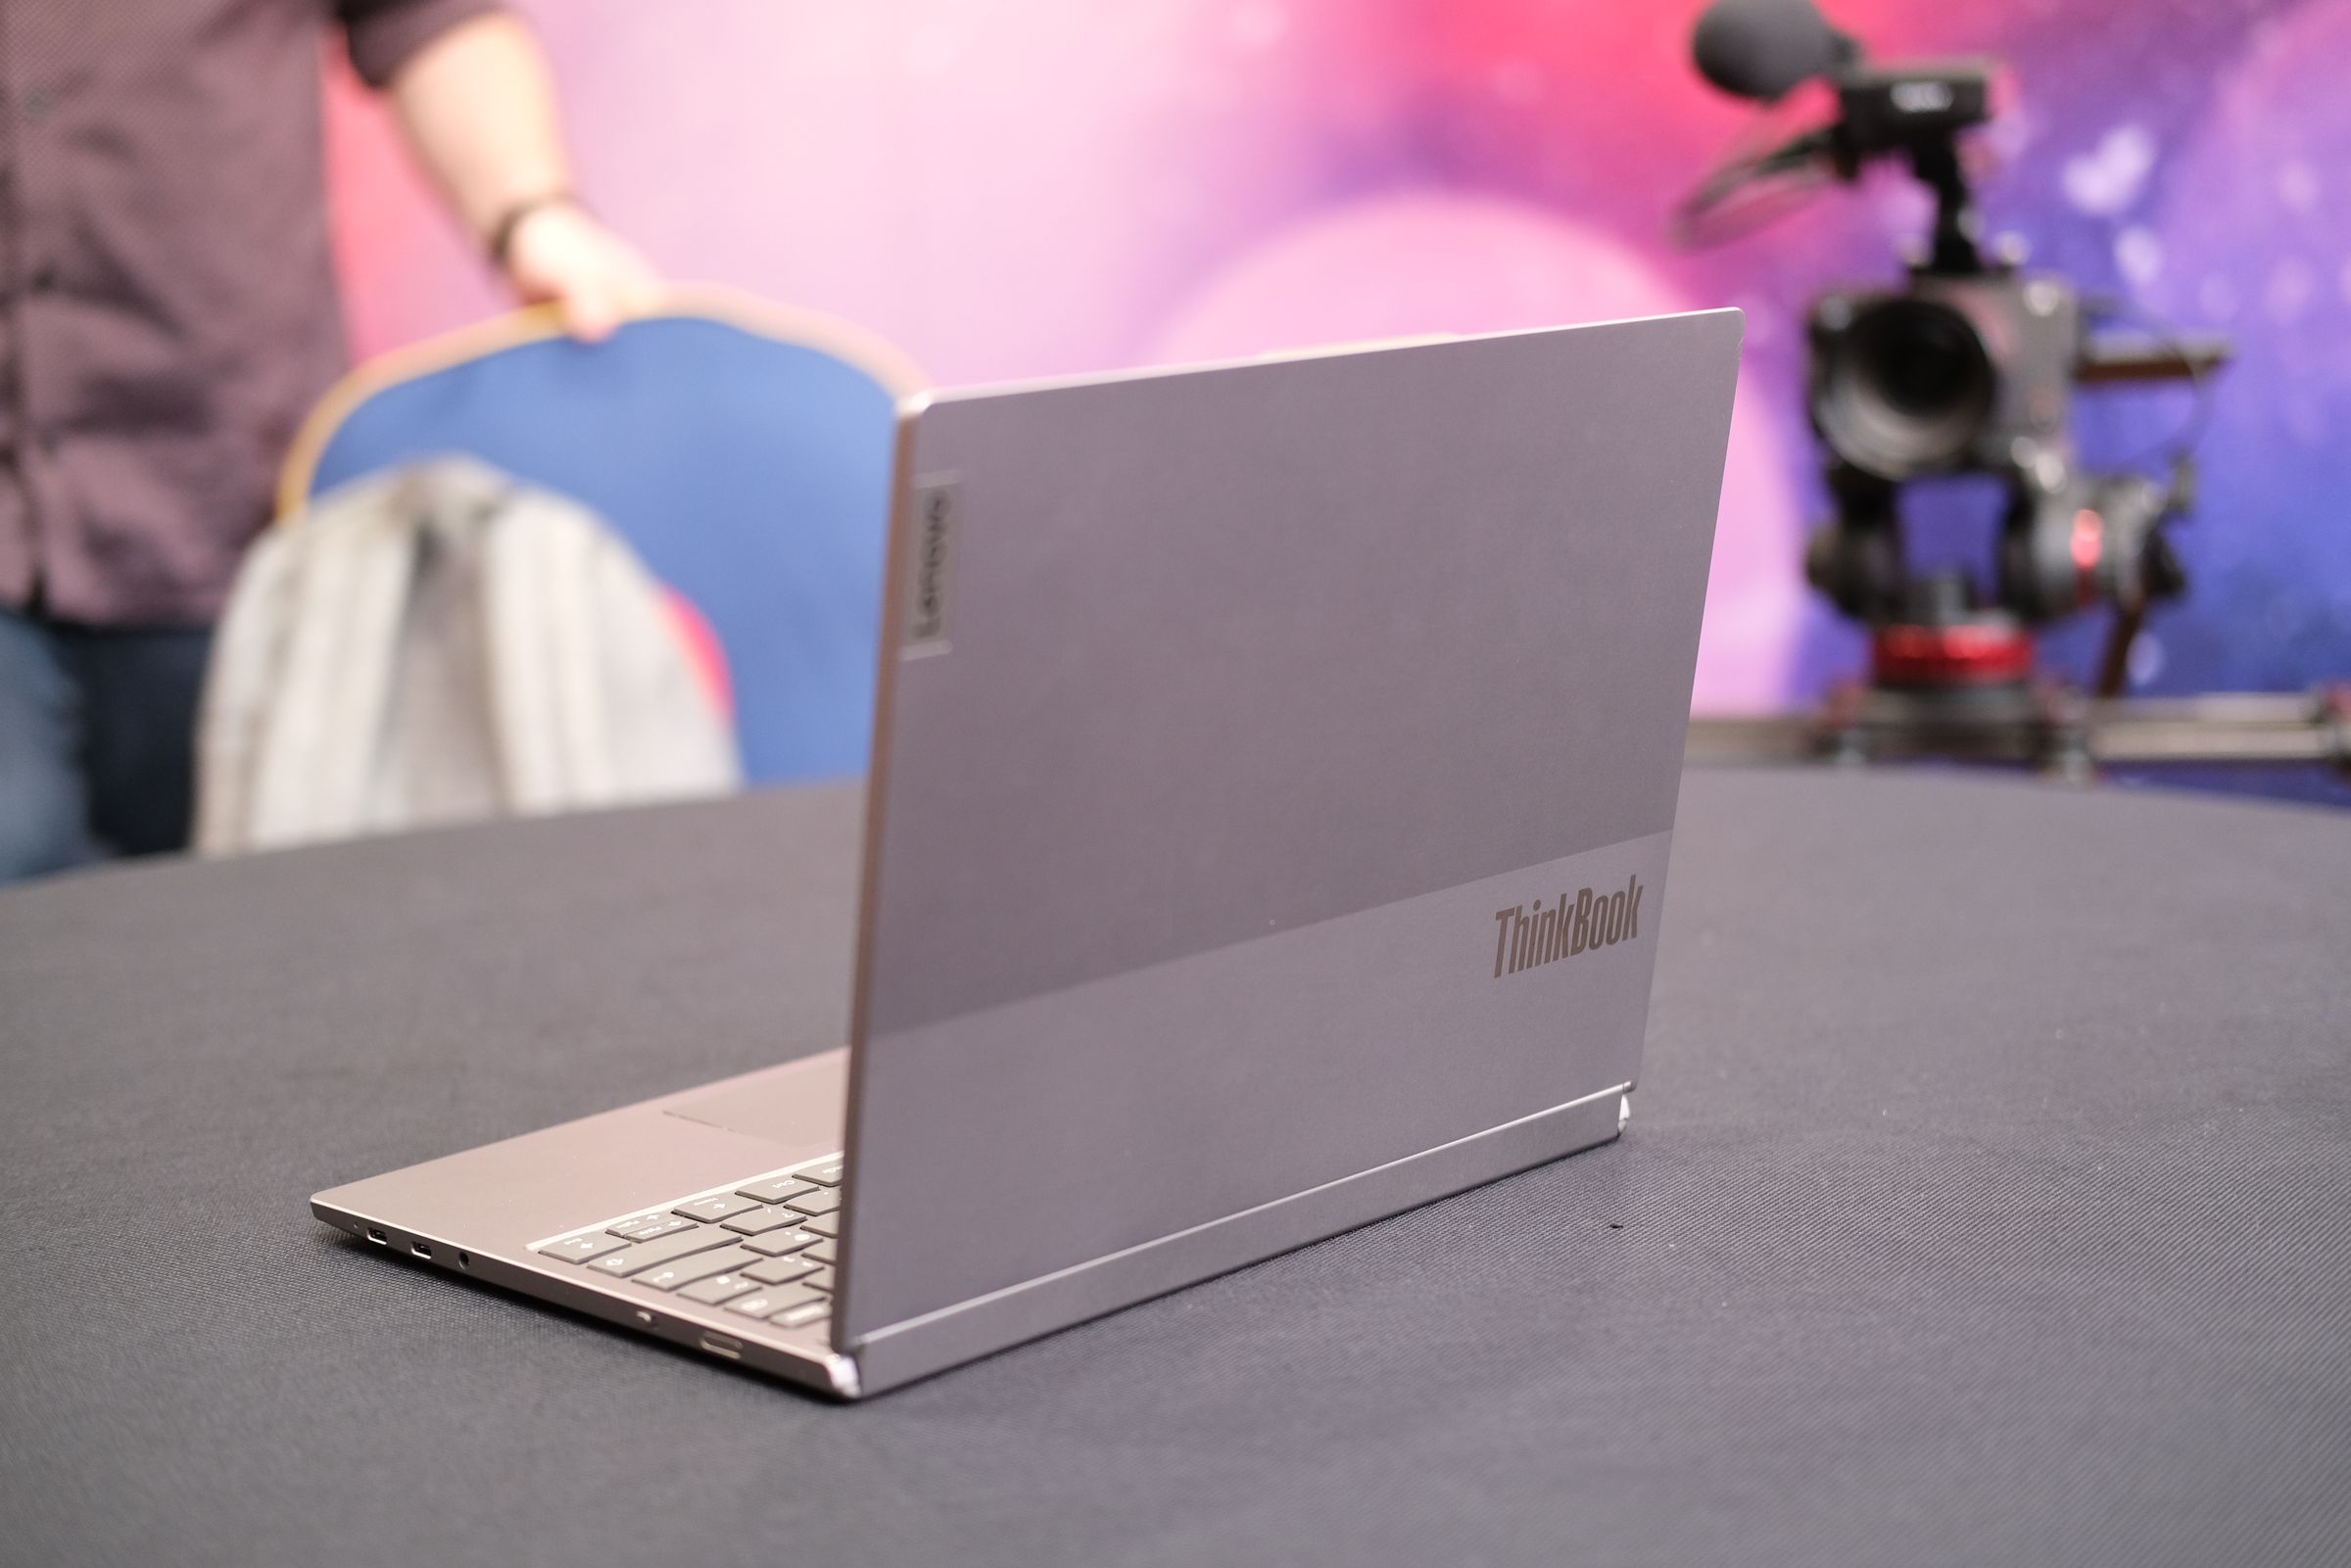 Lenovo foldable laptop that is not extended from the back.